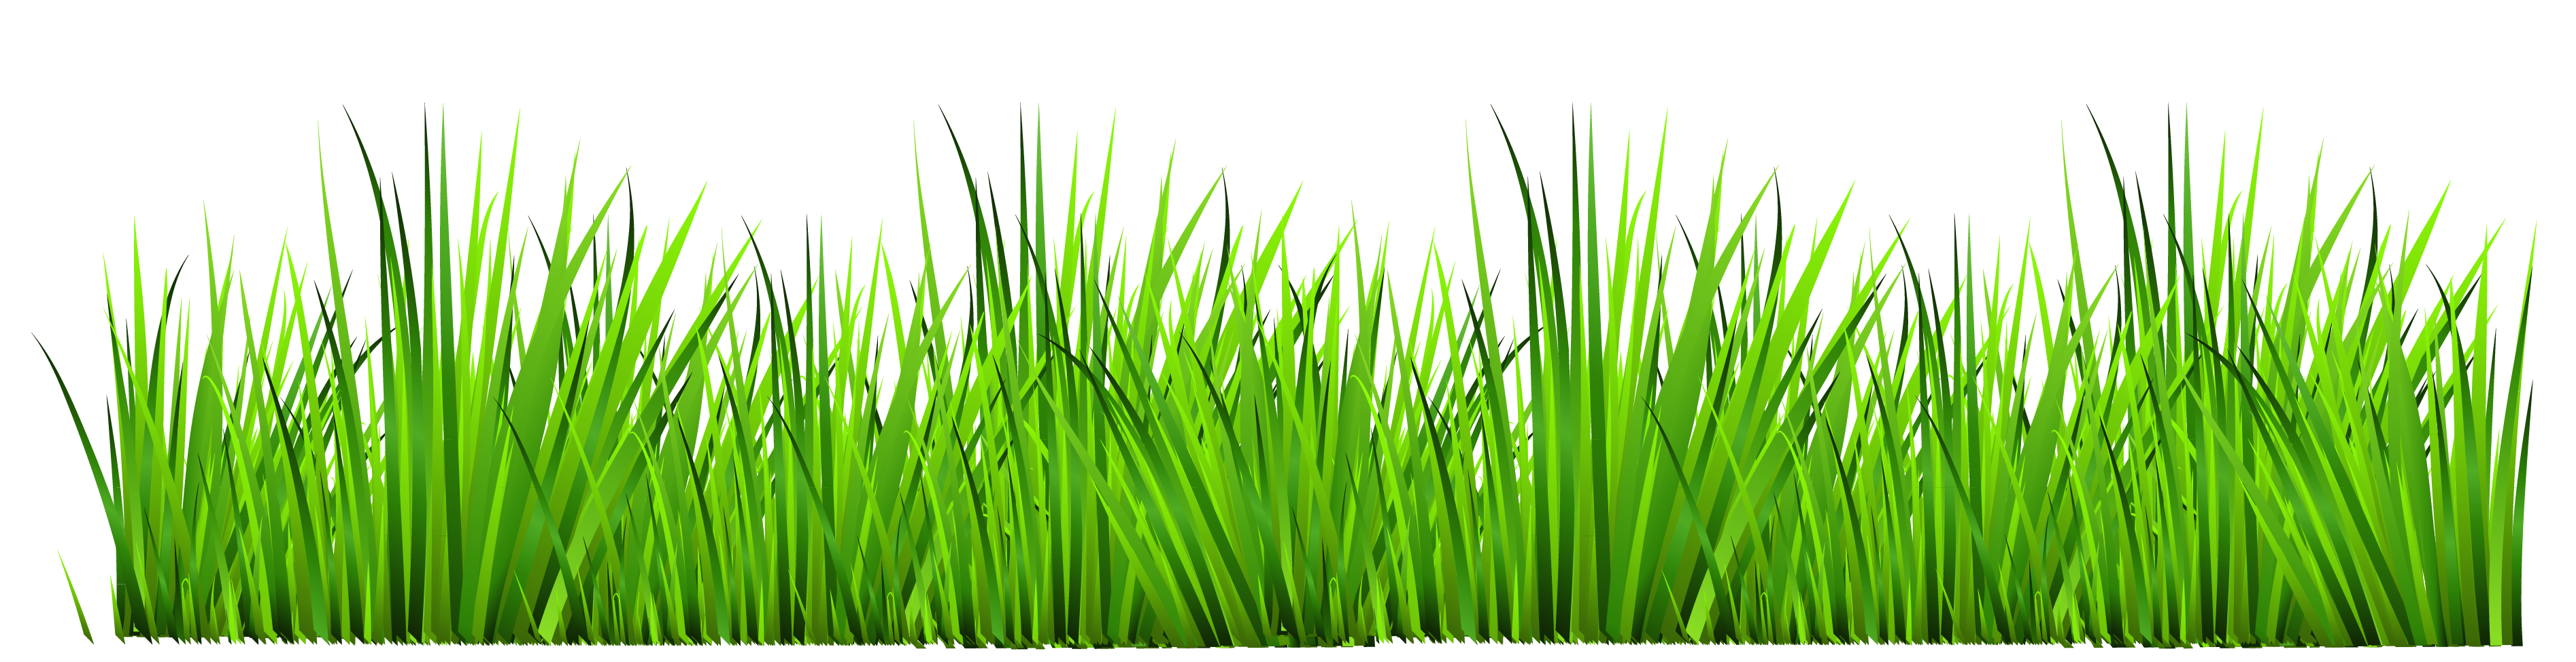 Grass clip art free free clipart images